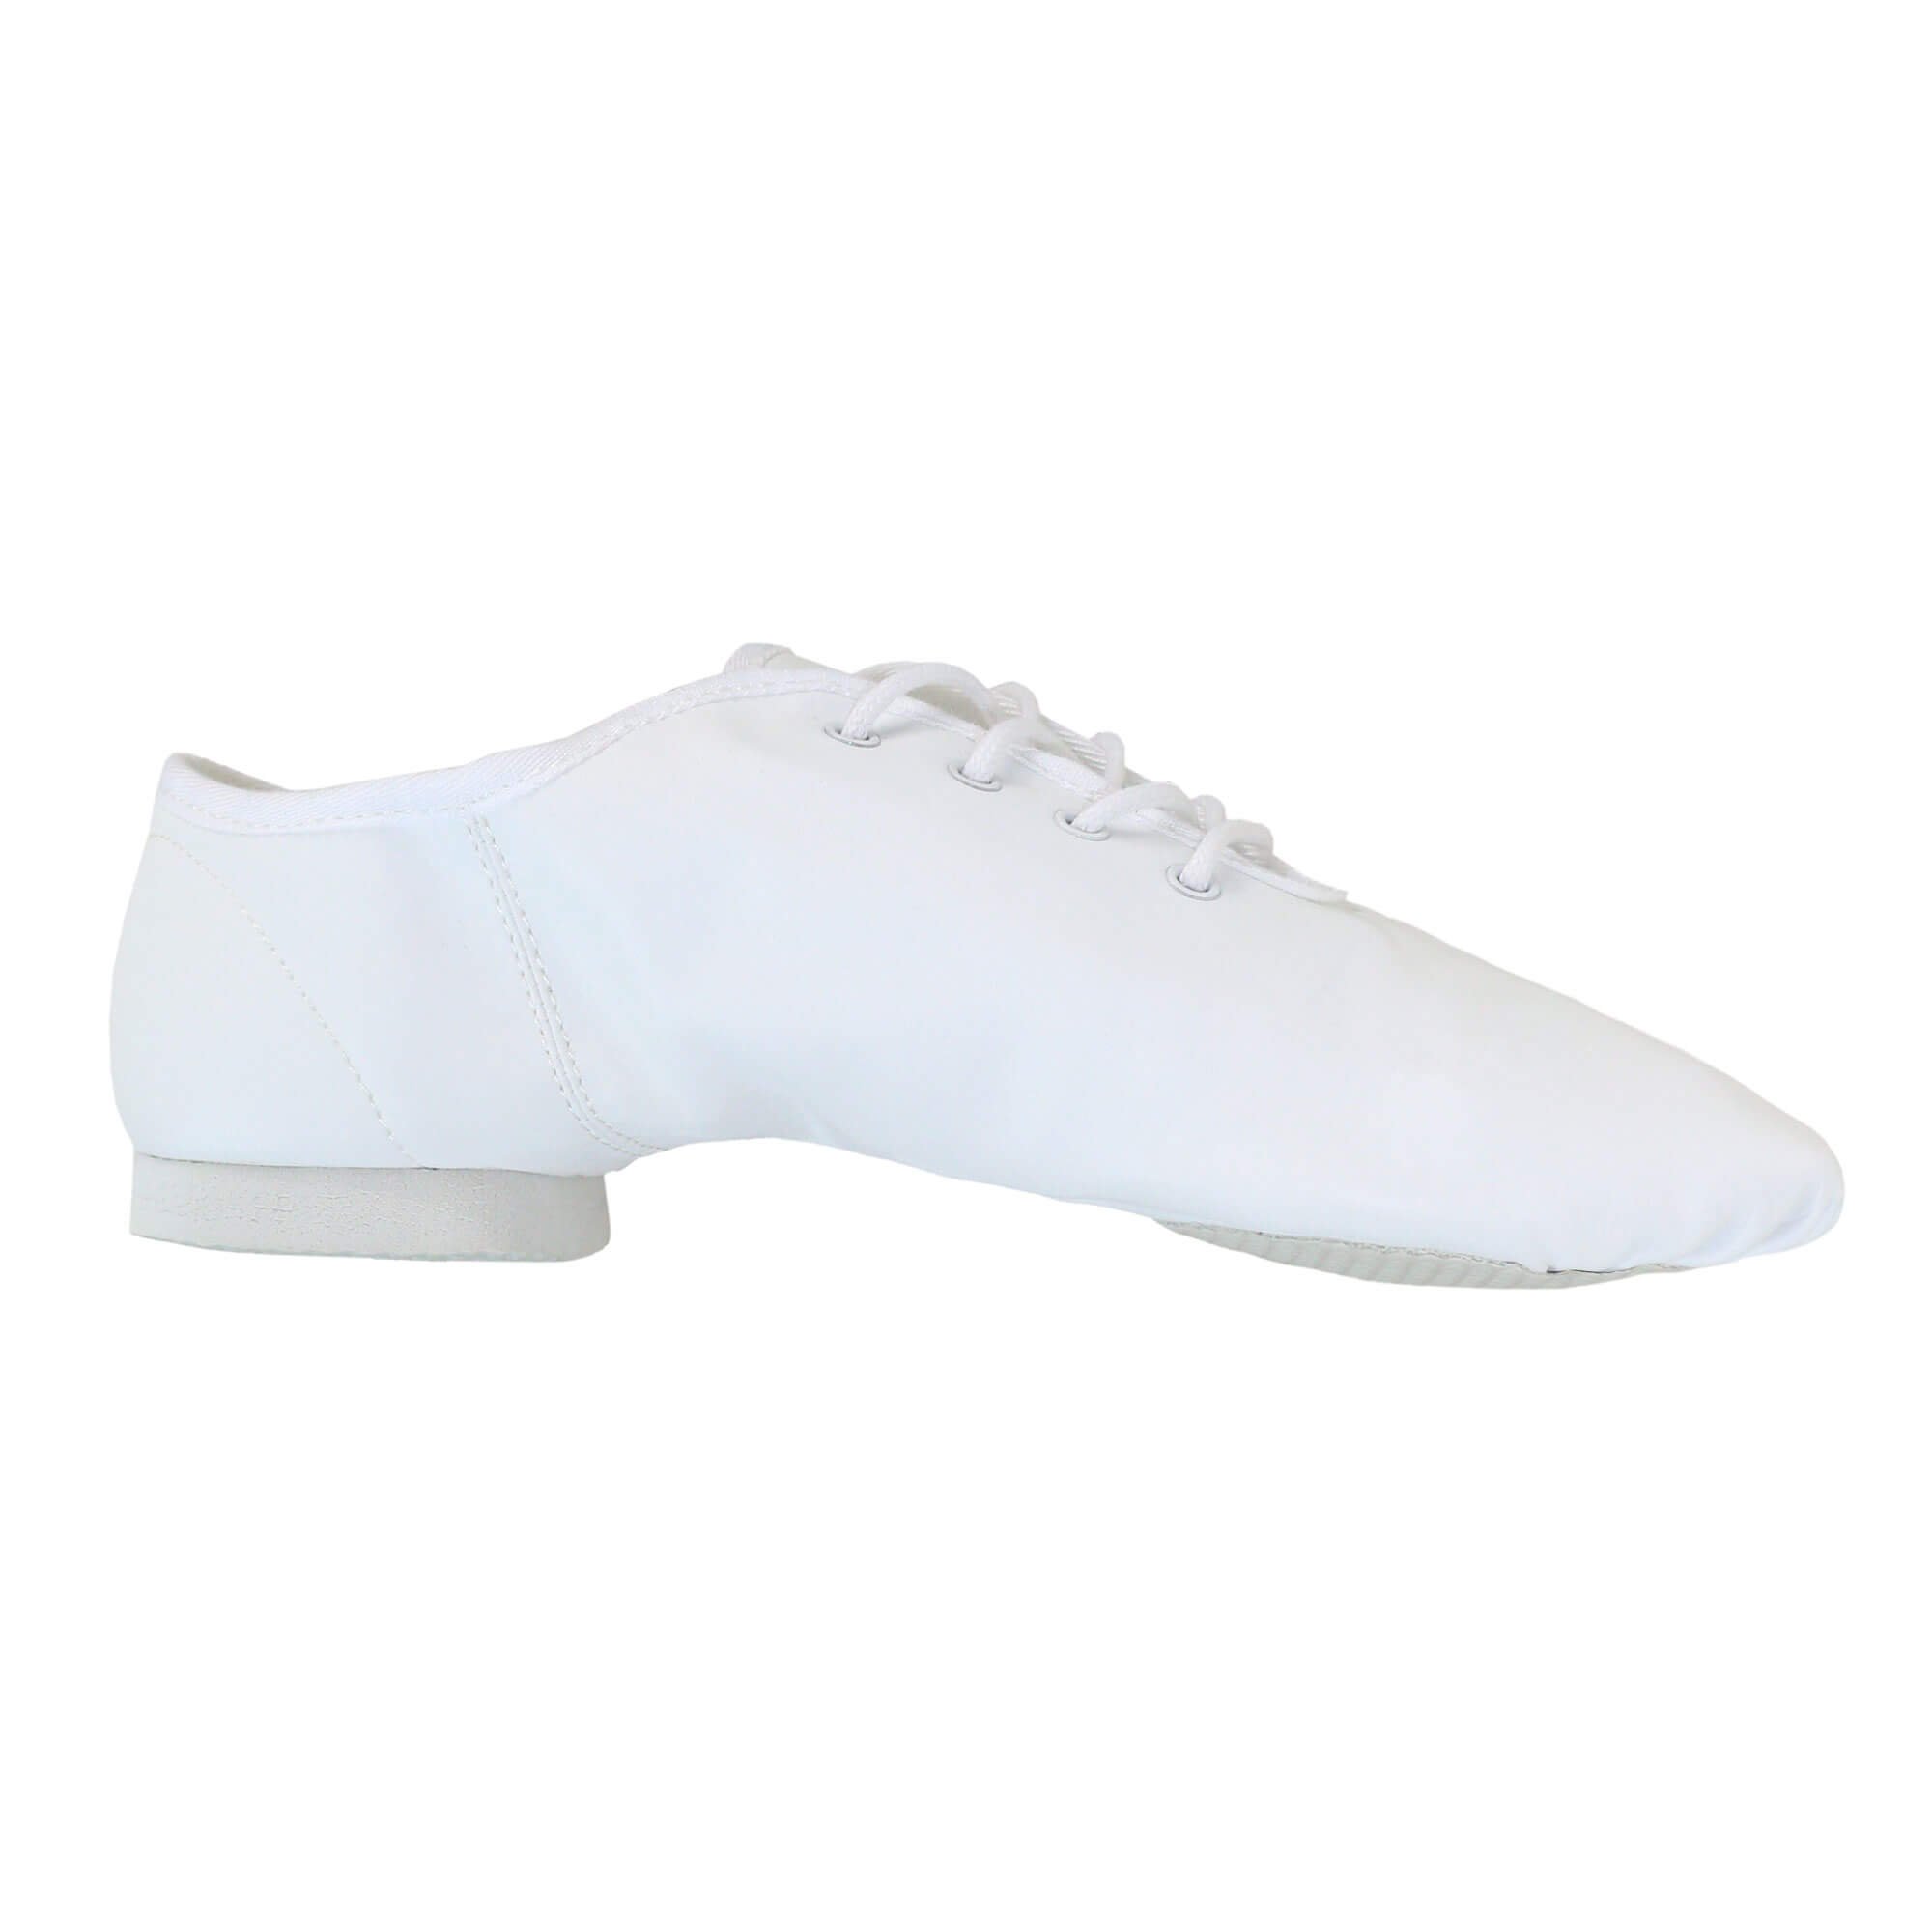 Danzcue Adult Lace up Jazz Shoes - Click Image to Close